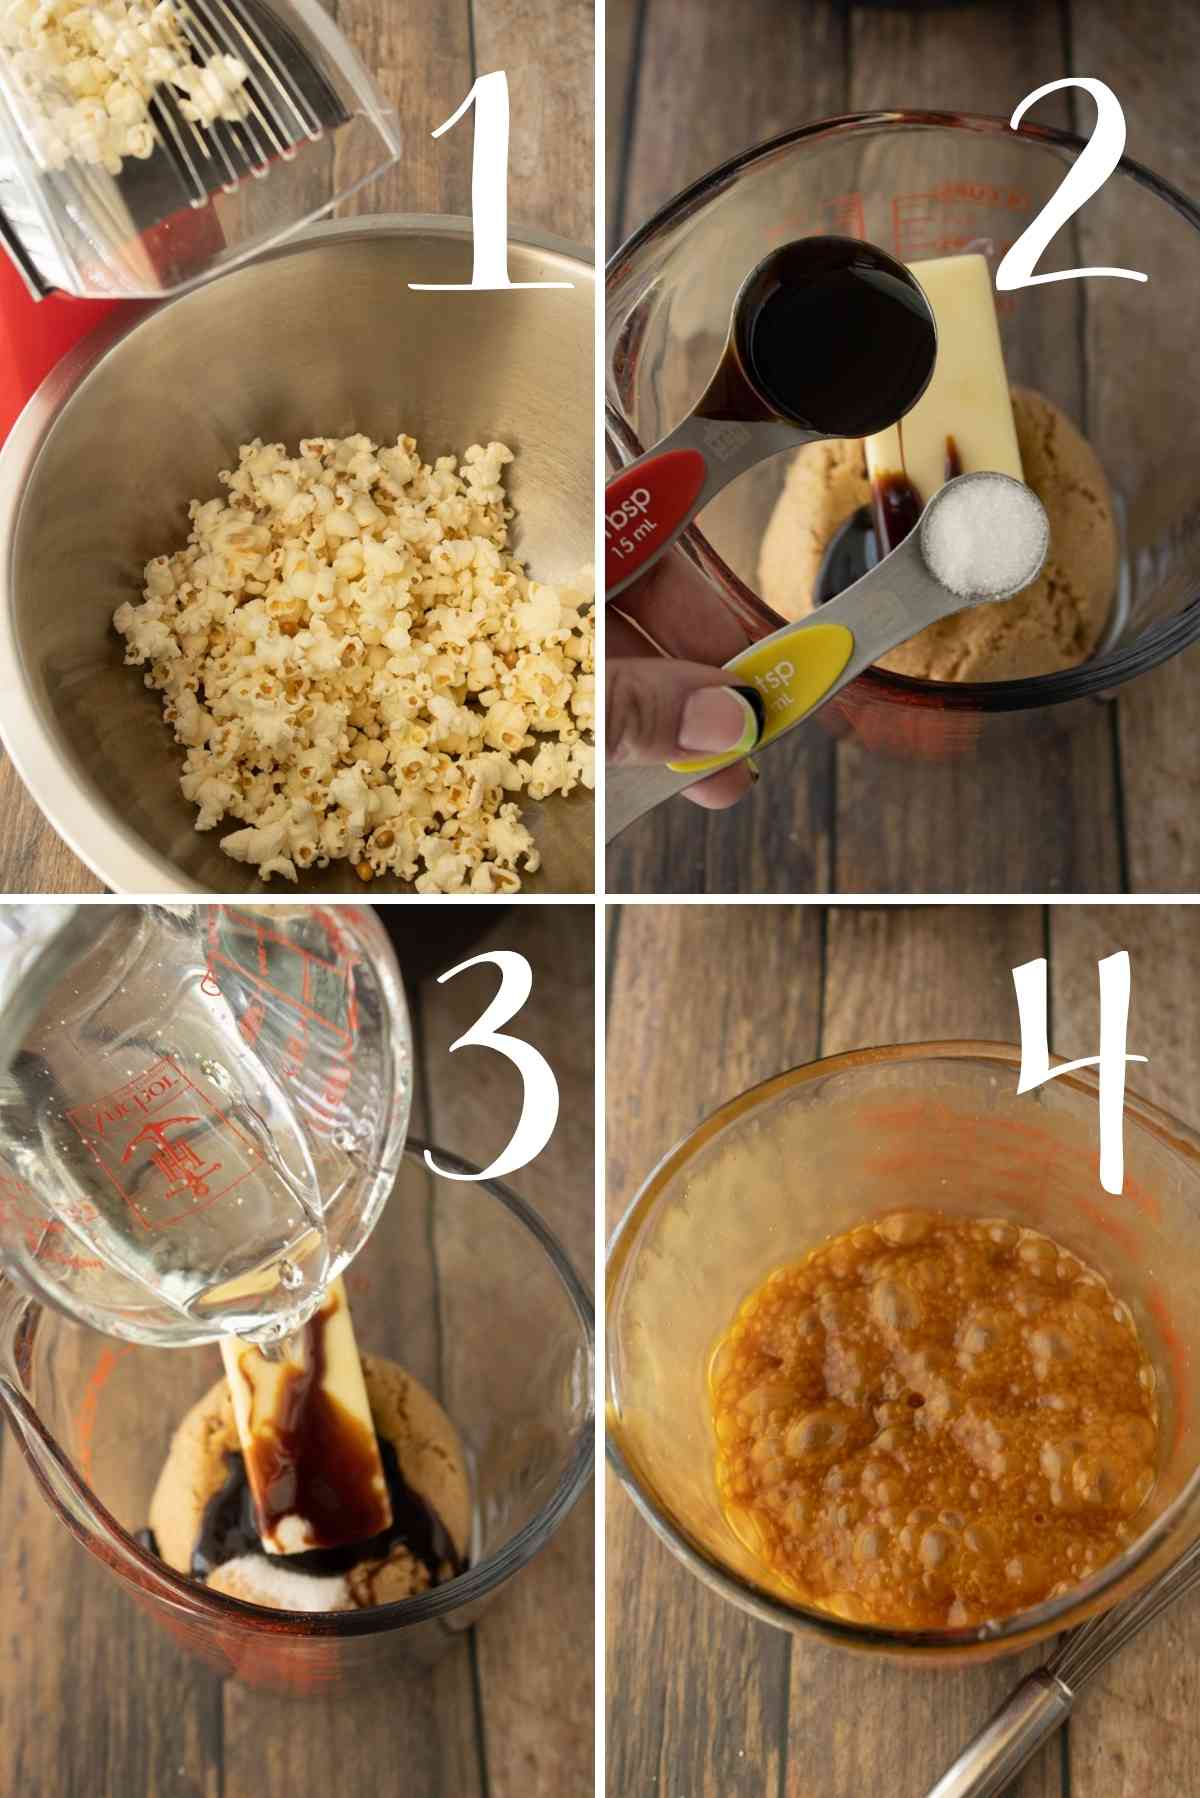 Pop fresh popcorn and whip up the caramel in the microwave!